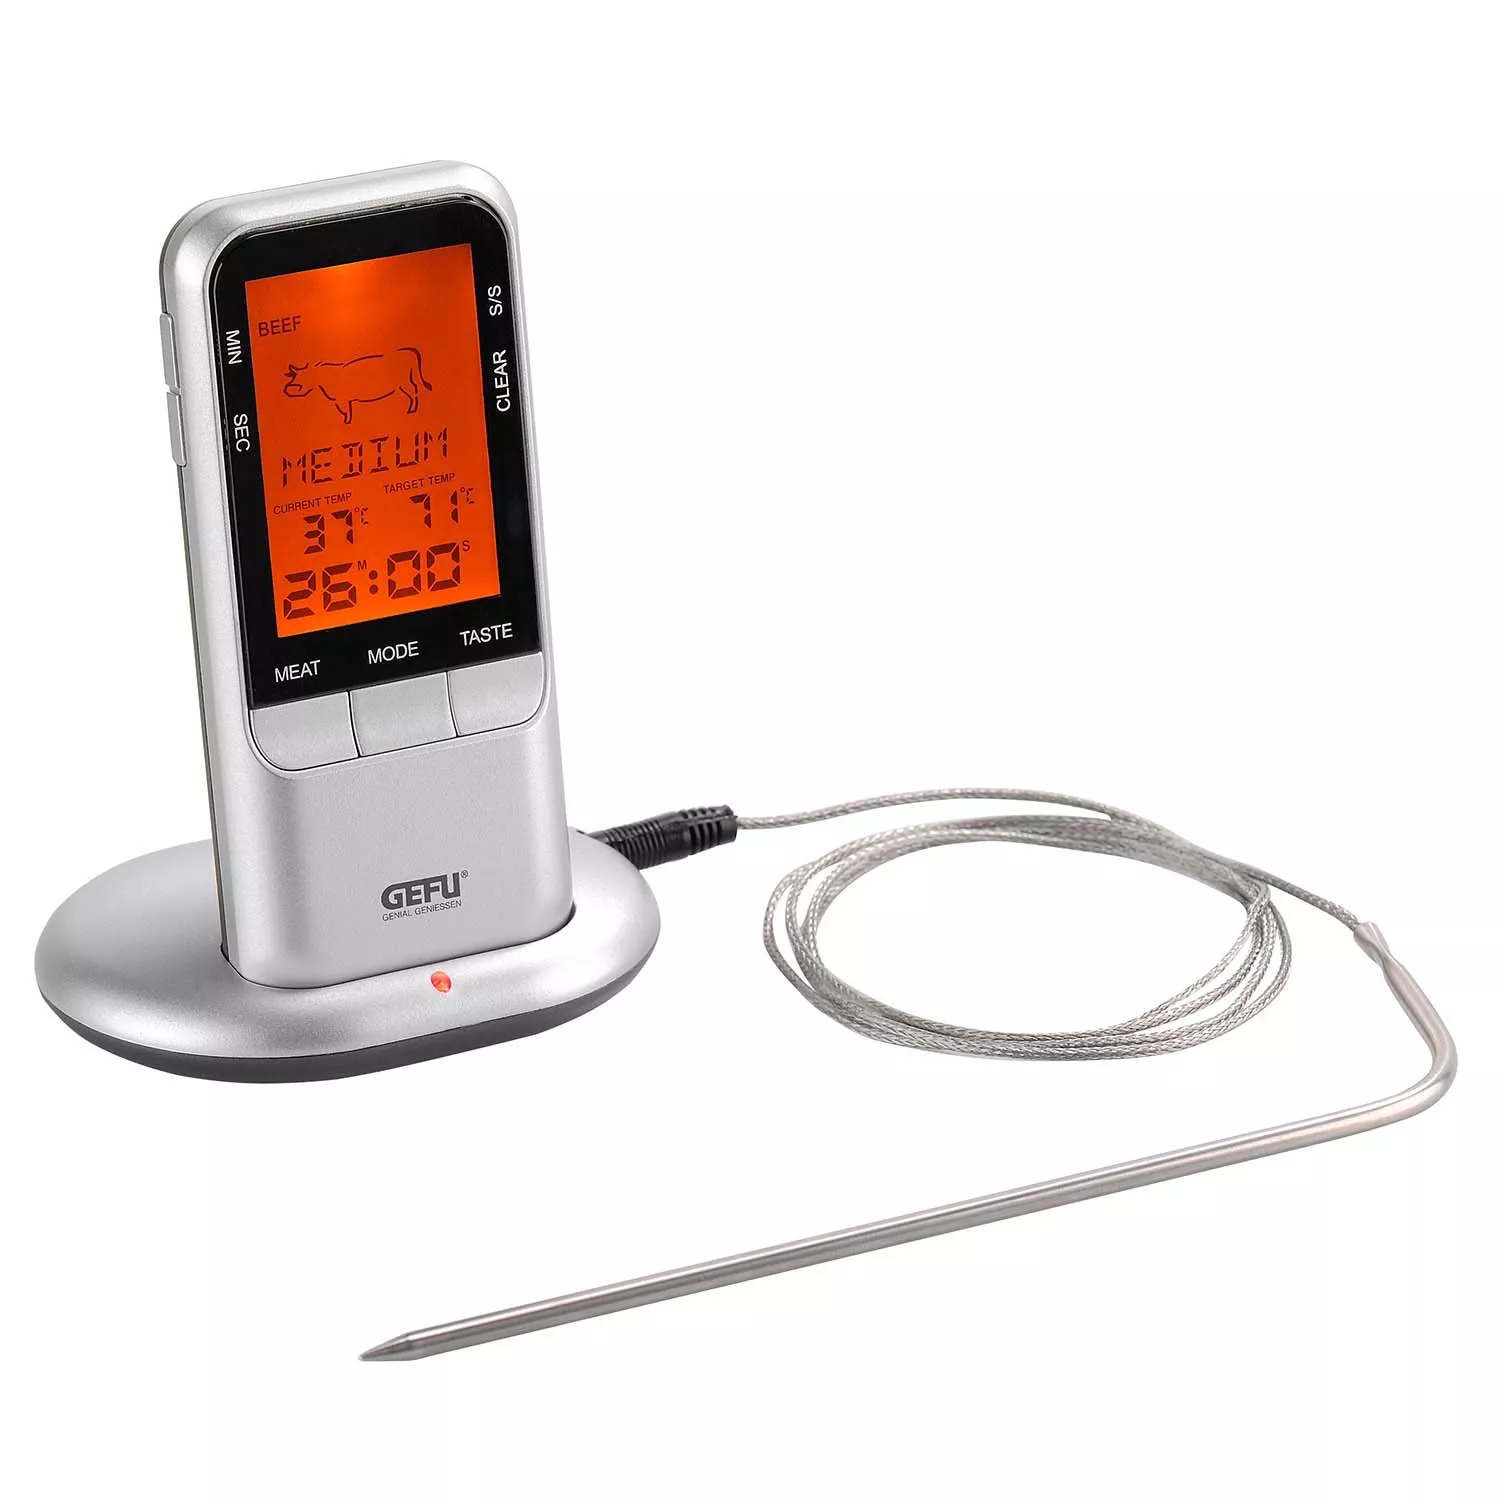 STAKE Truly Wireless Food Thermometer